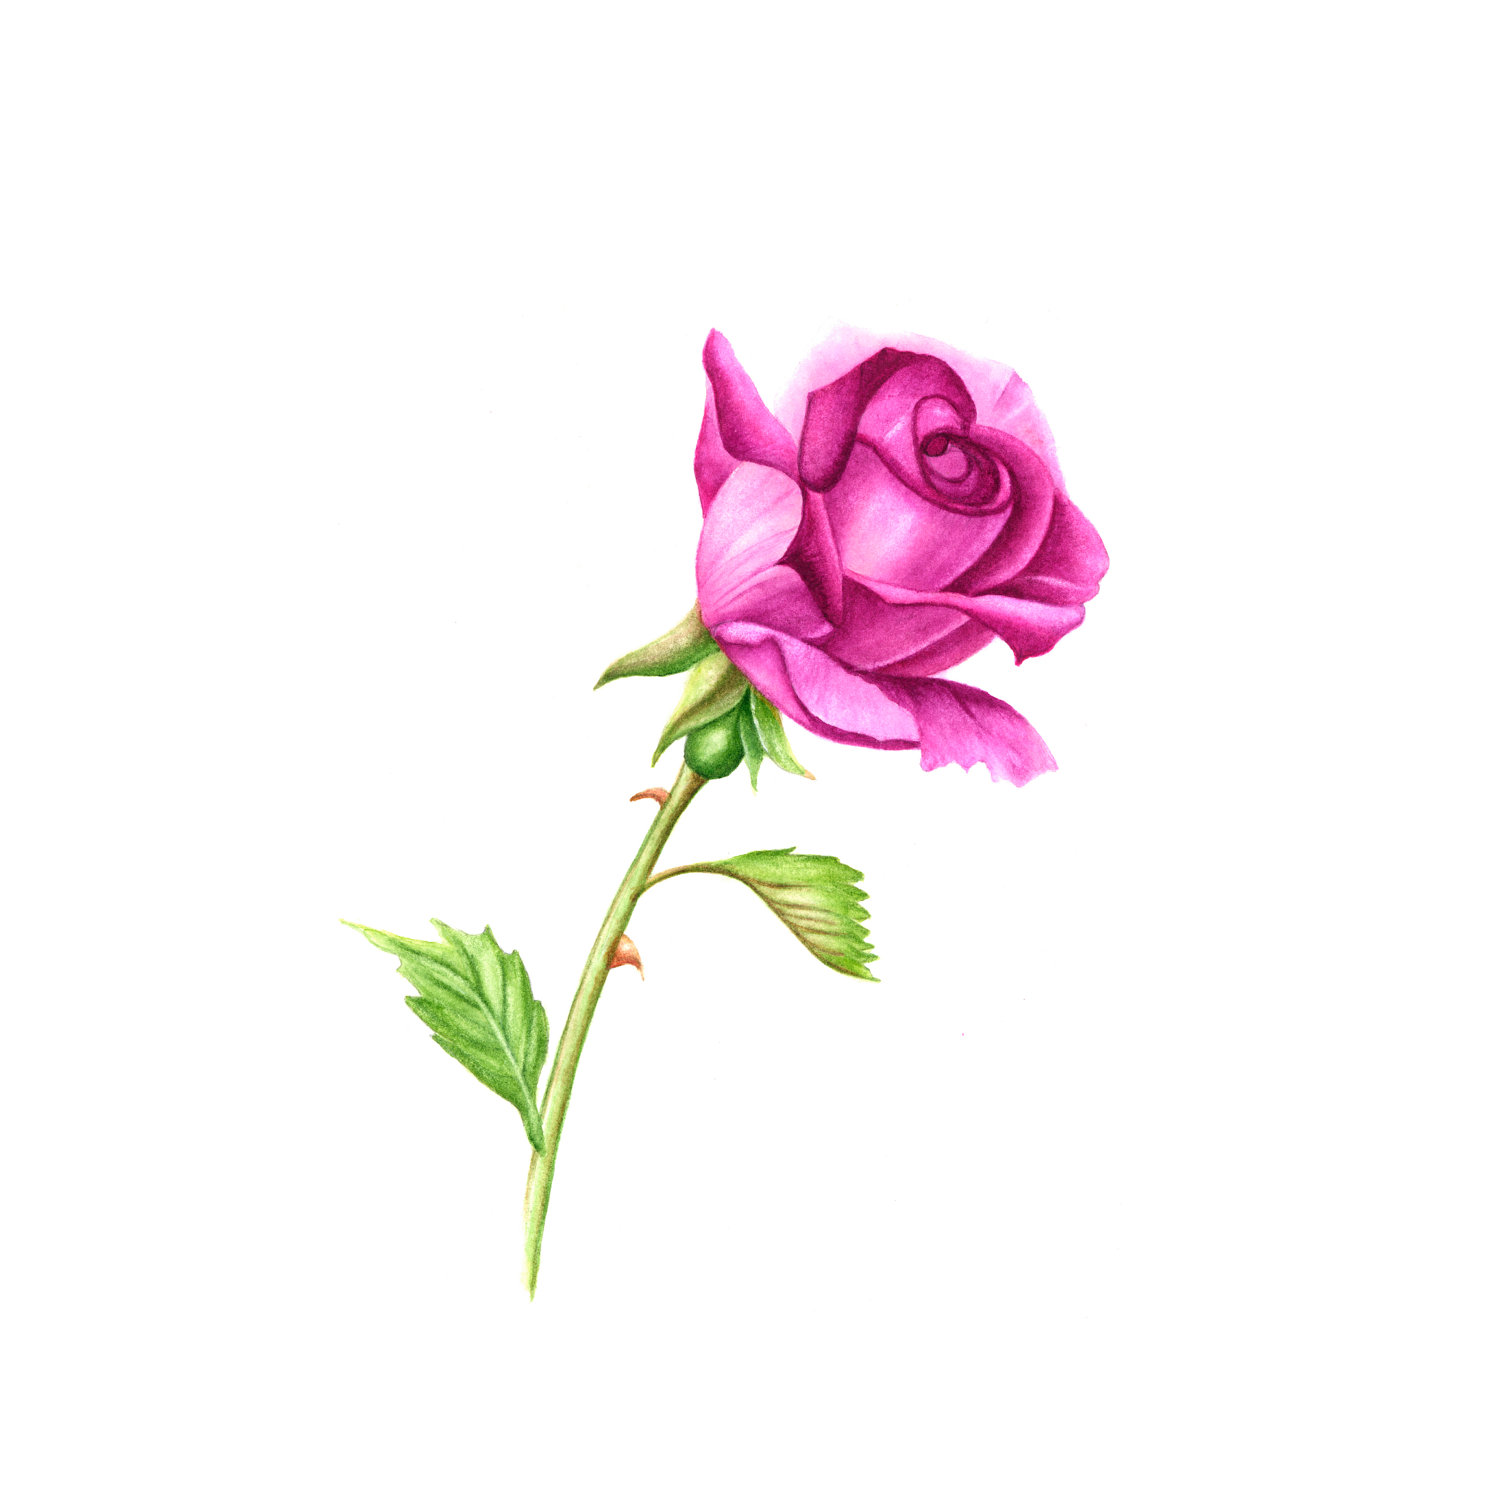 Rose With Stem Drawing